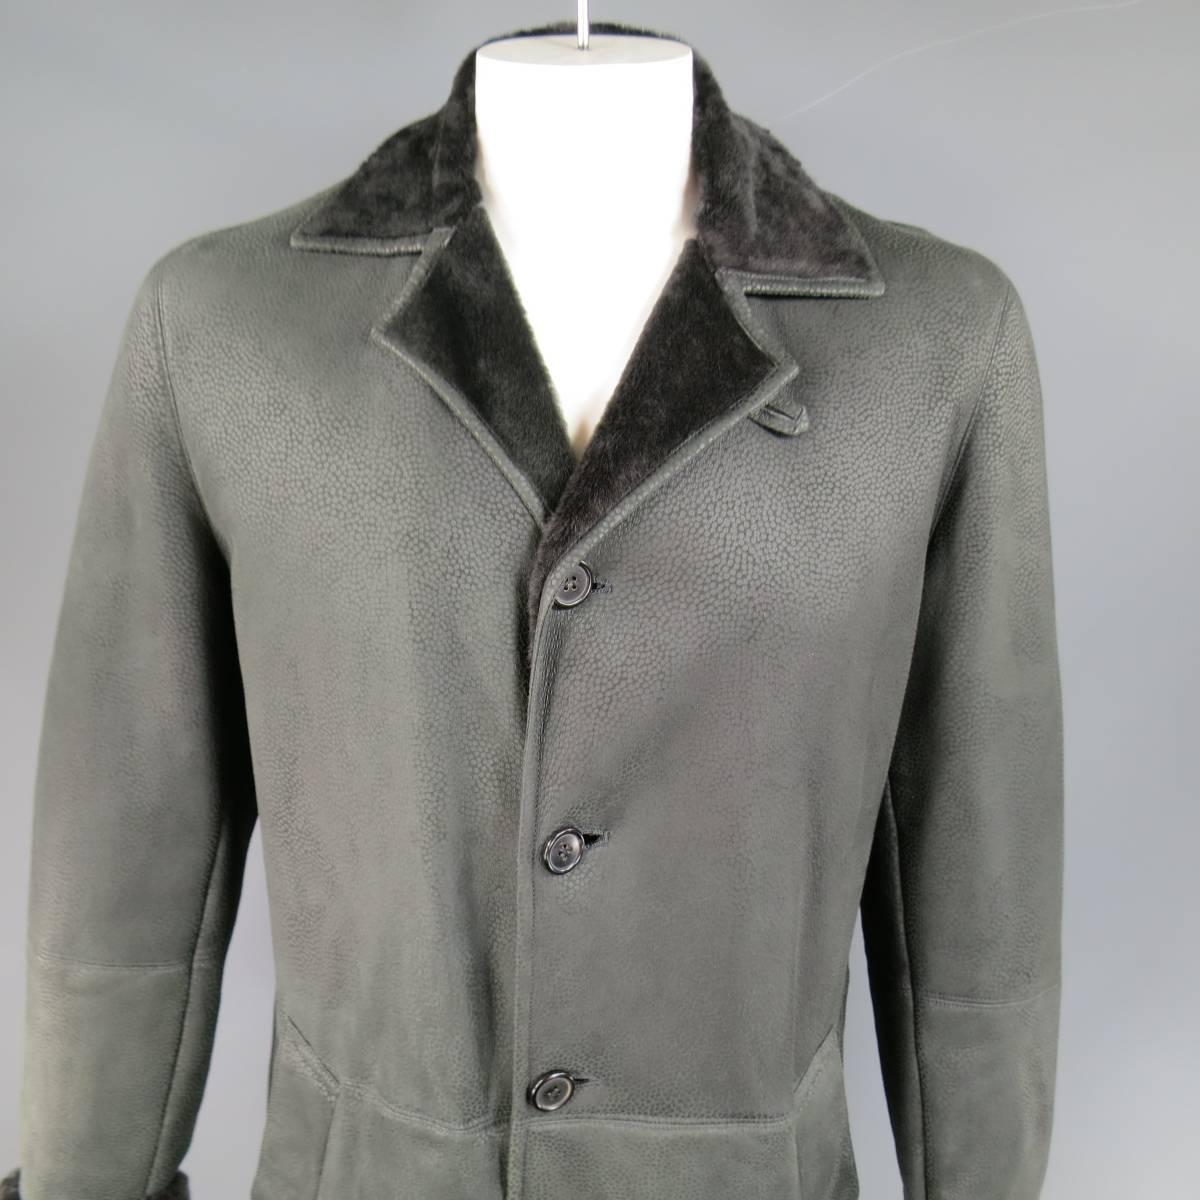 Classic SERAPHIN winter coat in soft black matte, spotted textured shearling leather with black fur lining, featuring a four button closure, pointed collar, and slanted pockets. Made in France.
Retails at $5500.00.
 
Excellent Pre-Owned